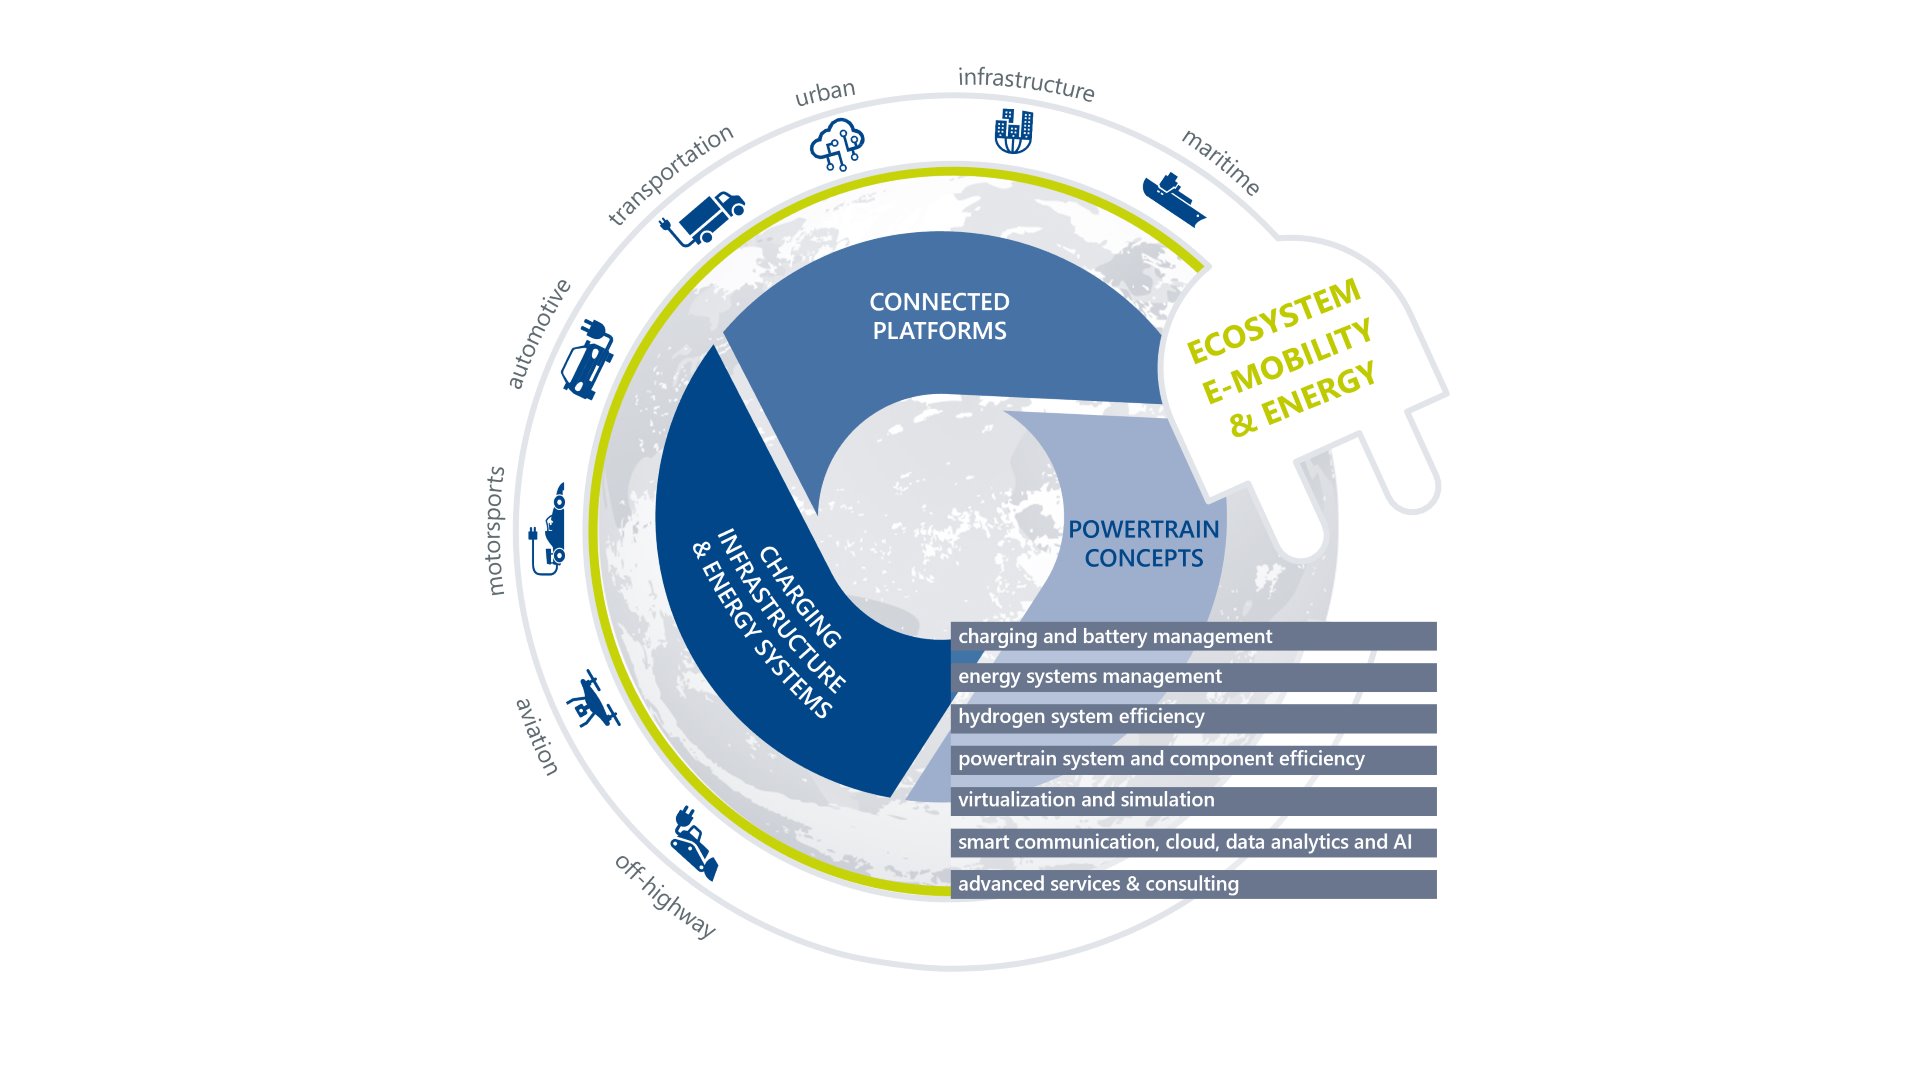 The infographic illustrates the ecosystem-centered approach used by ITK for the ecosystem e-mobility and energy. This approach dovetails diverse industries such as automotive, motorsports, aviation and maritime with the application areas of powertrain concepts, connected platforms and charging infrastructure & energy systems.